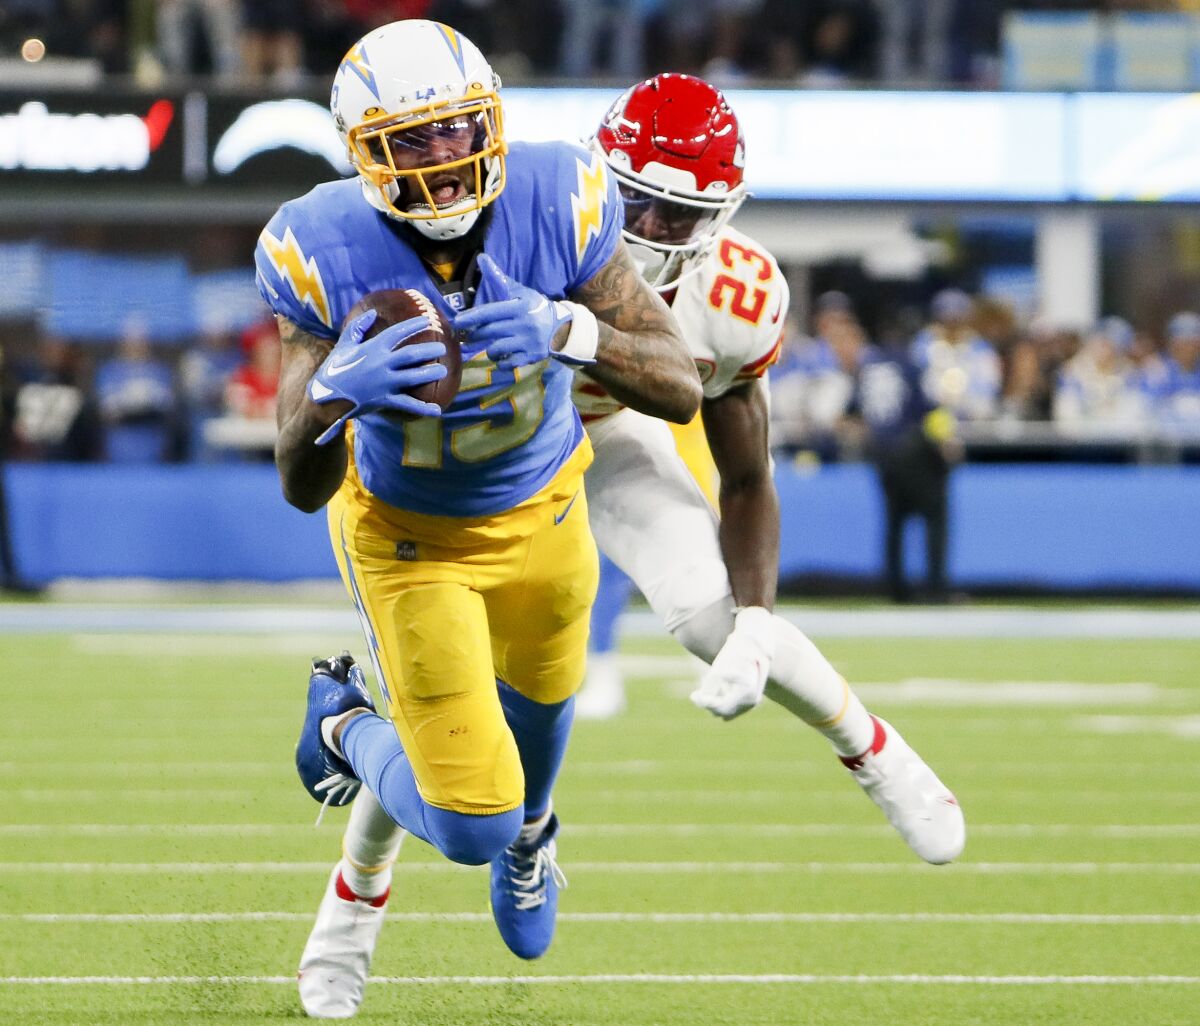 Chargers receiver Keenan Allen catches a pass in front of Kansas City cornerback Joshua Williams 